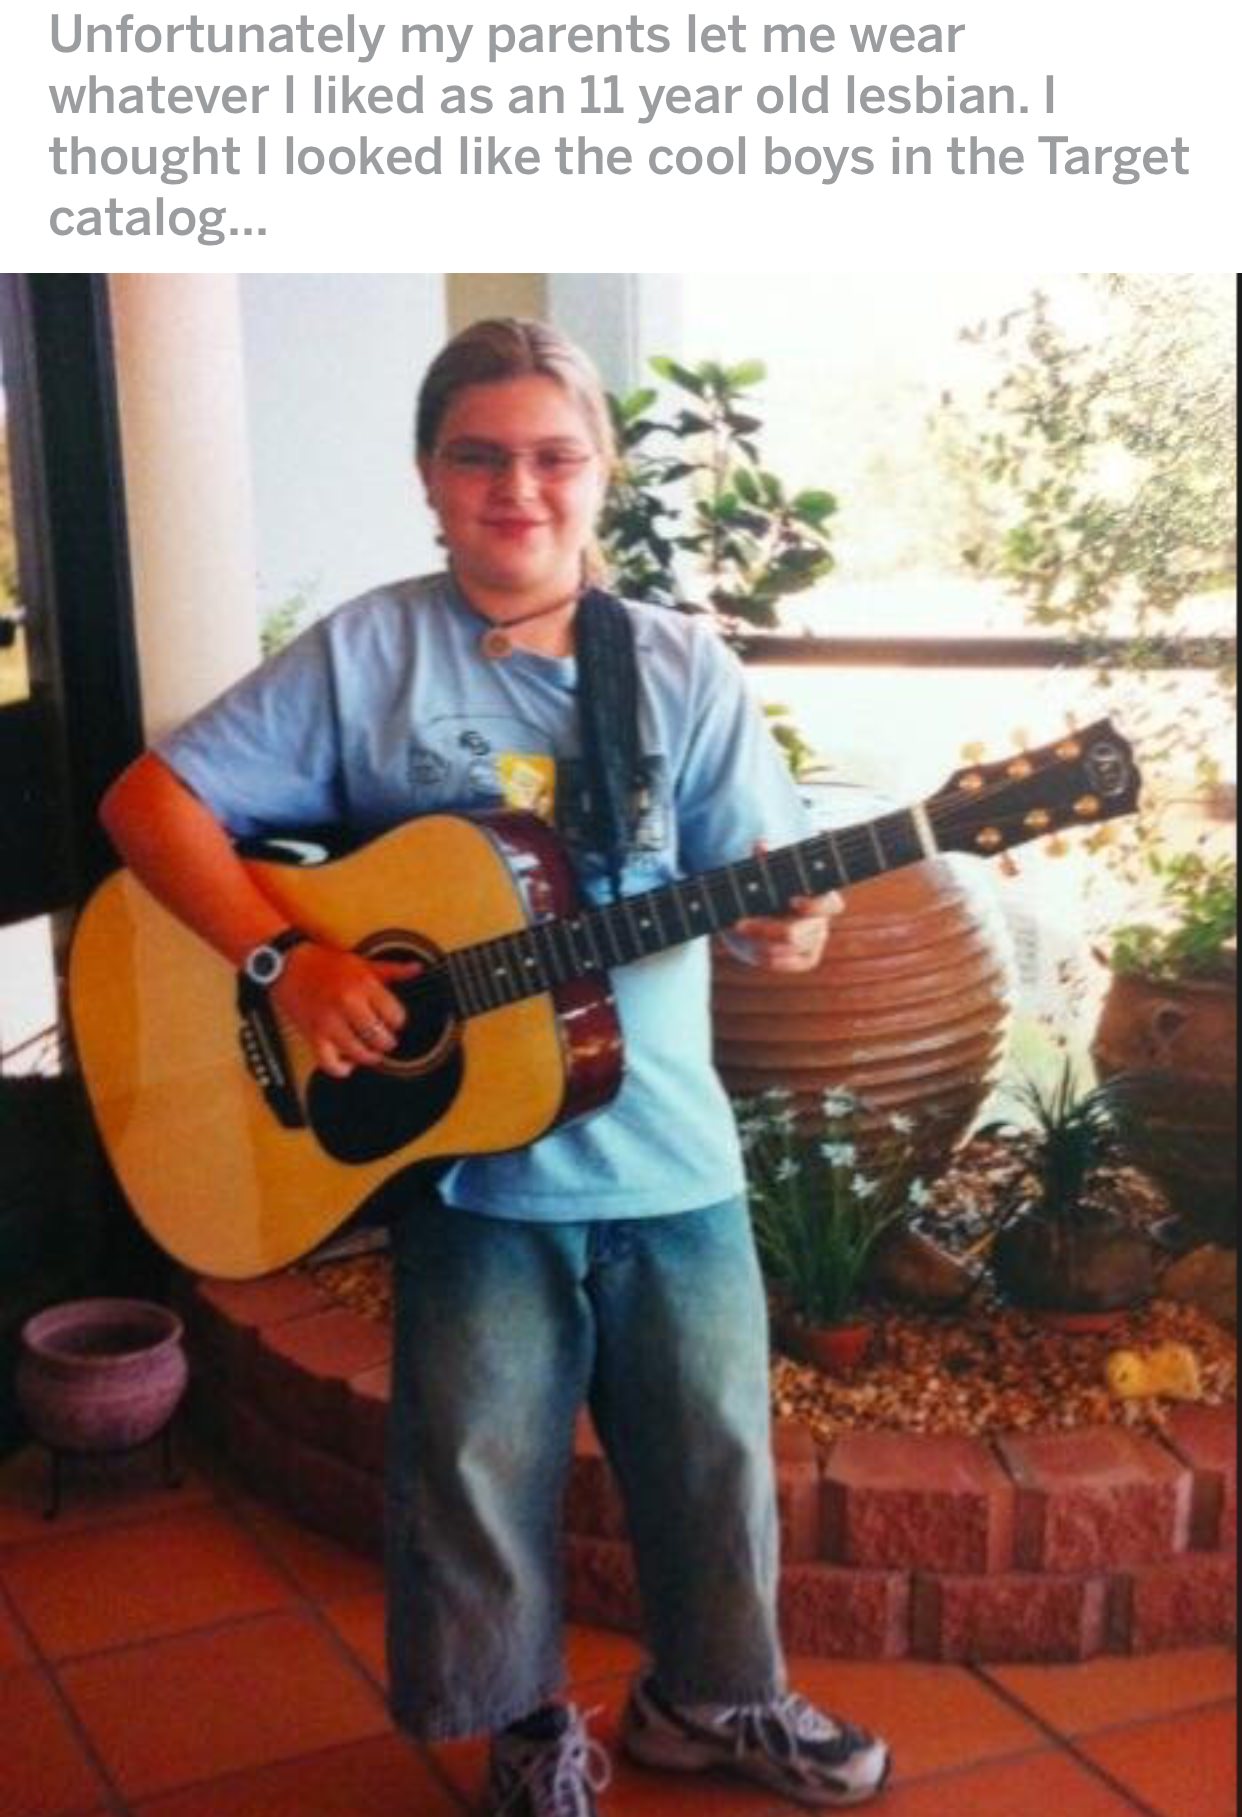 music - Unfortunately my parents let me wear whatever I d as an 11 year old lesbian. I thought I looked the cool boys in the Target catalog...